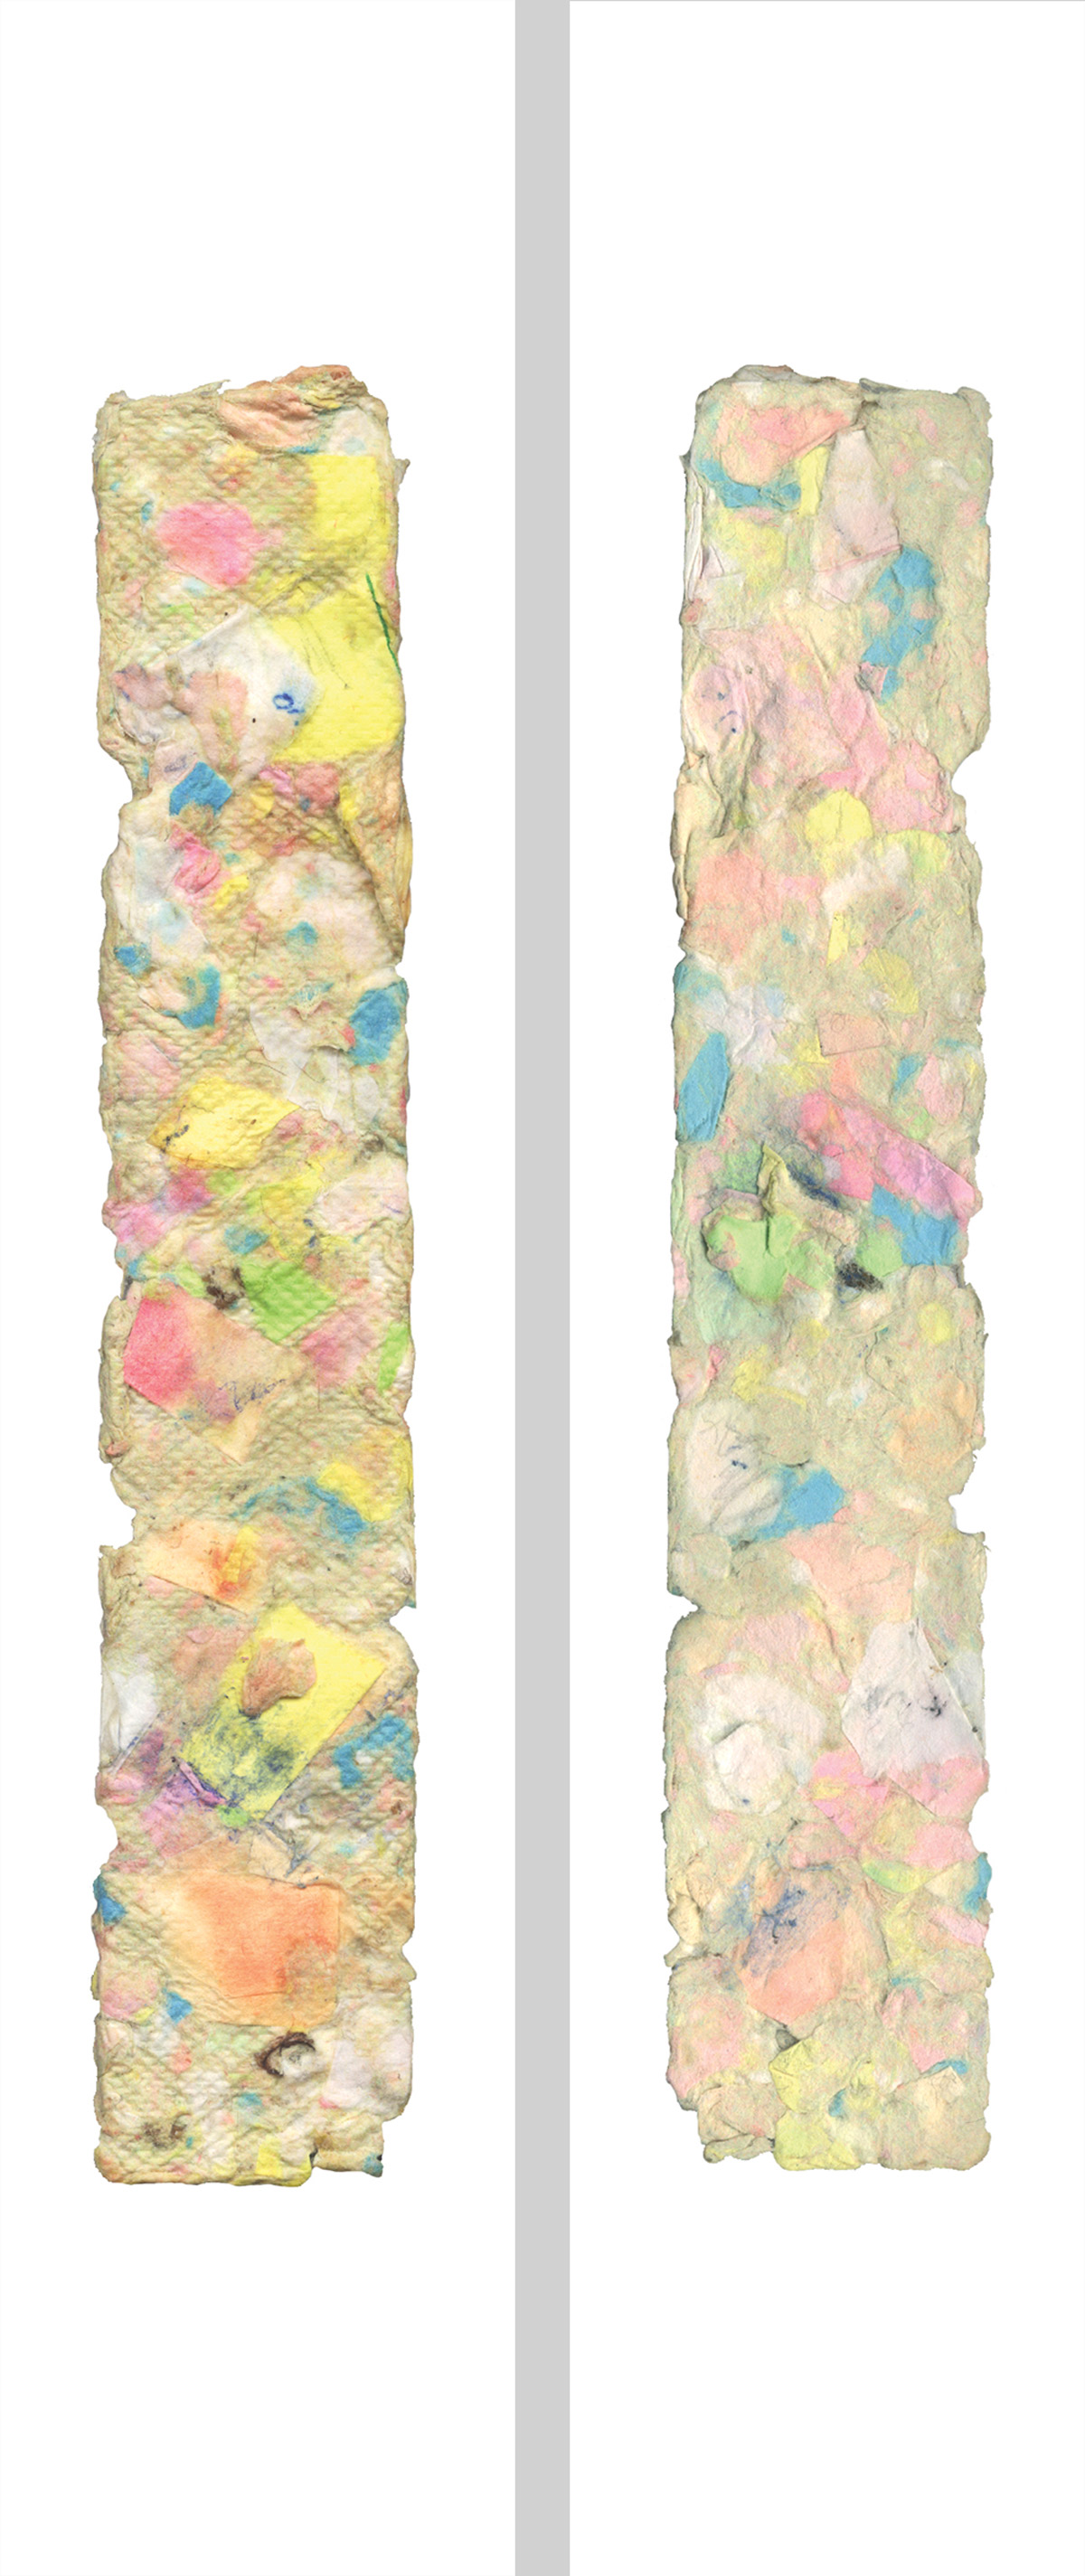 This issue's bookmark featuring two photographs, on its front and back, of a long hunk of compacted colored paper.